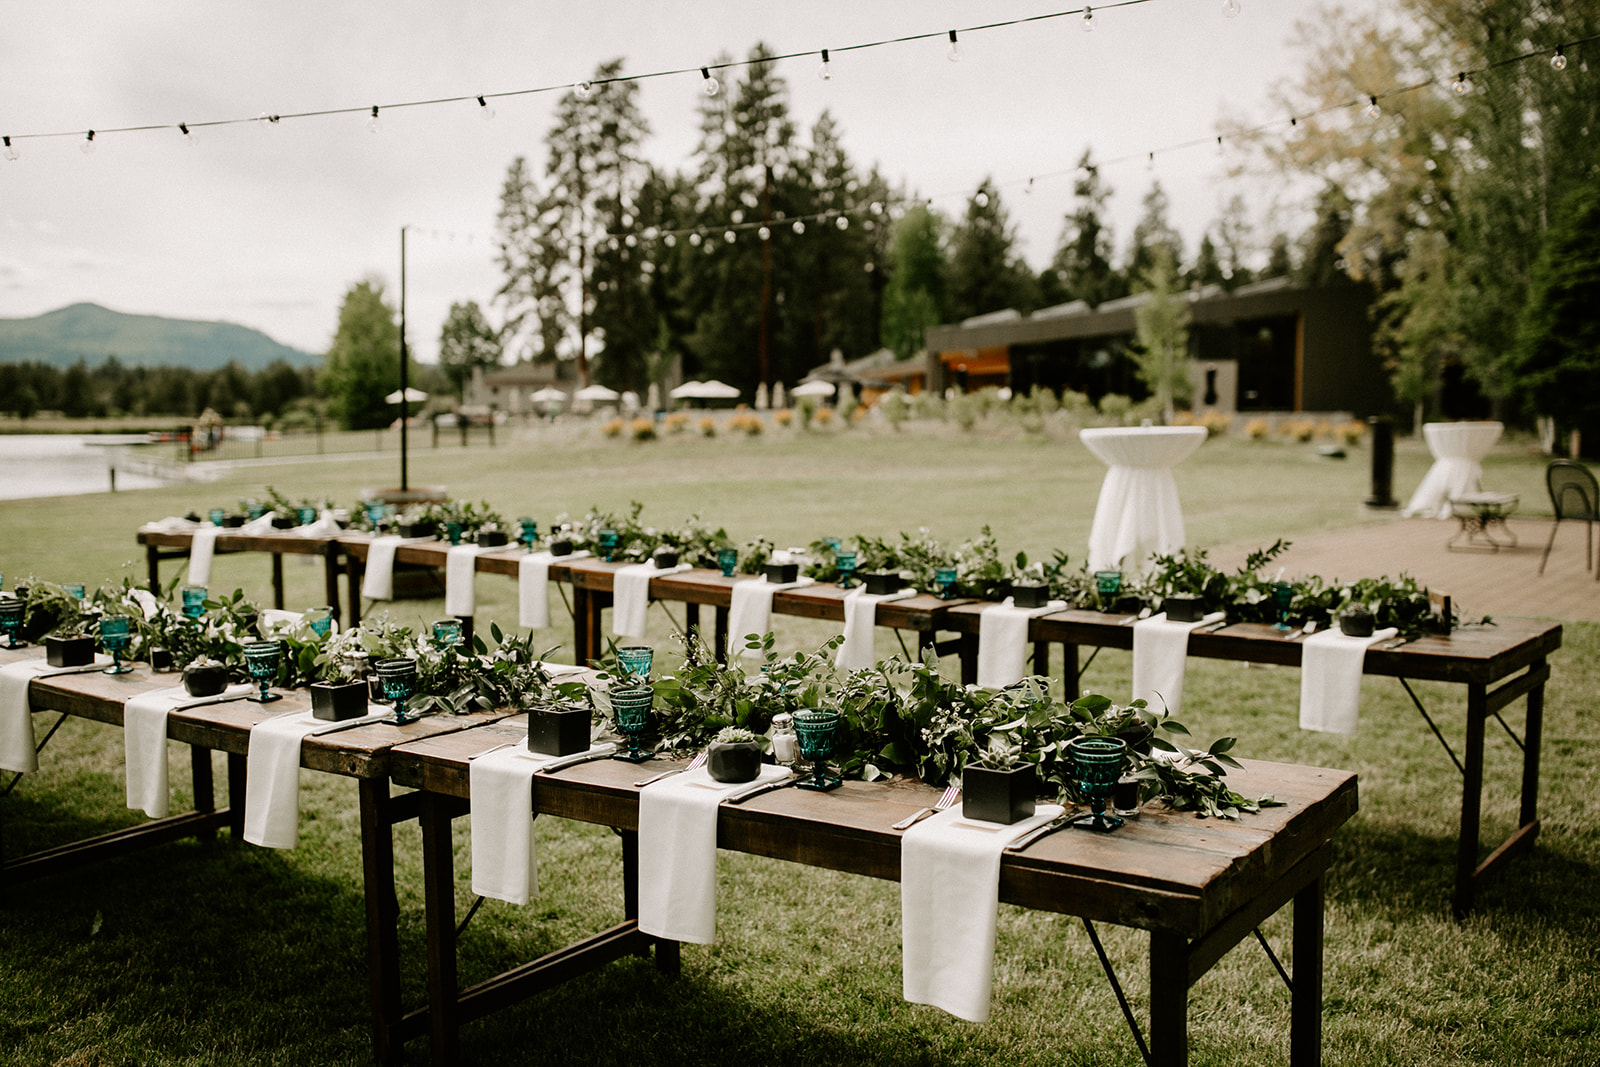 Black+Butte+Ranch++farm+table+wedding+event+rentals+Bend+Oregon+Curated+Dawn+Charles+Photography.jpg